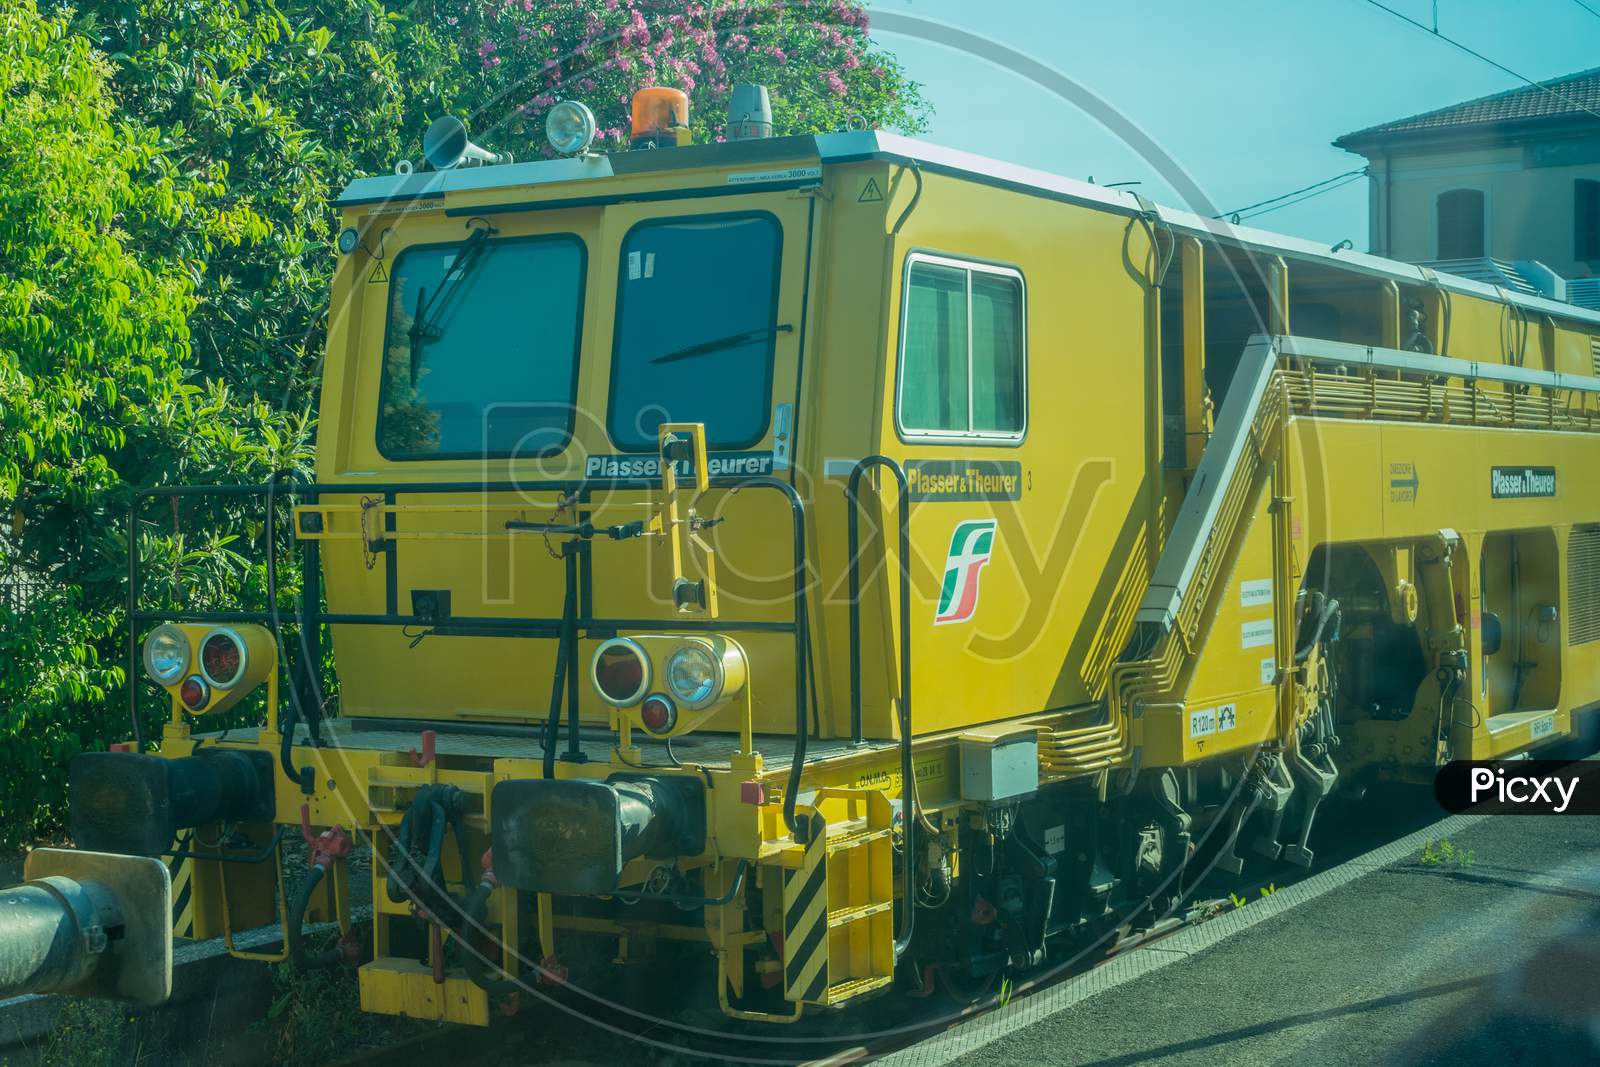 Italy - 28 June 2018: The Plasser And Theurer On Trenitalia In The Italian Outskirts Track